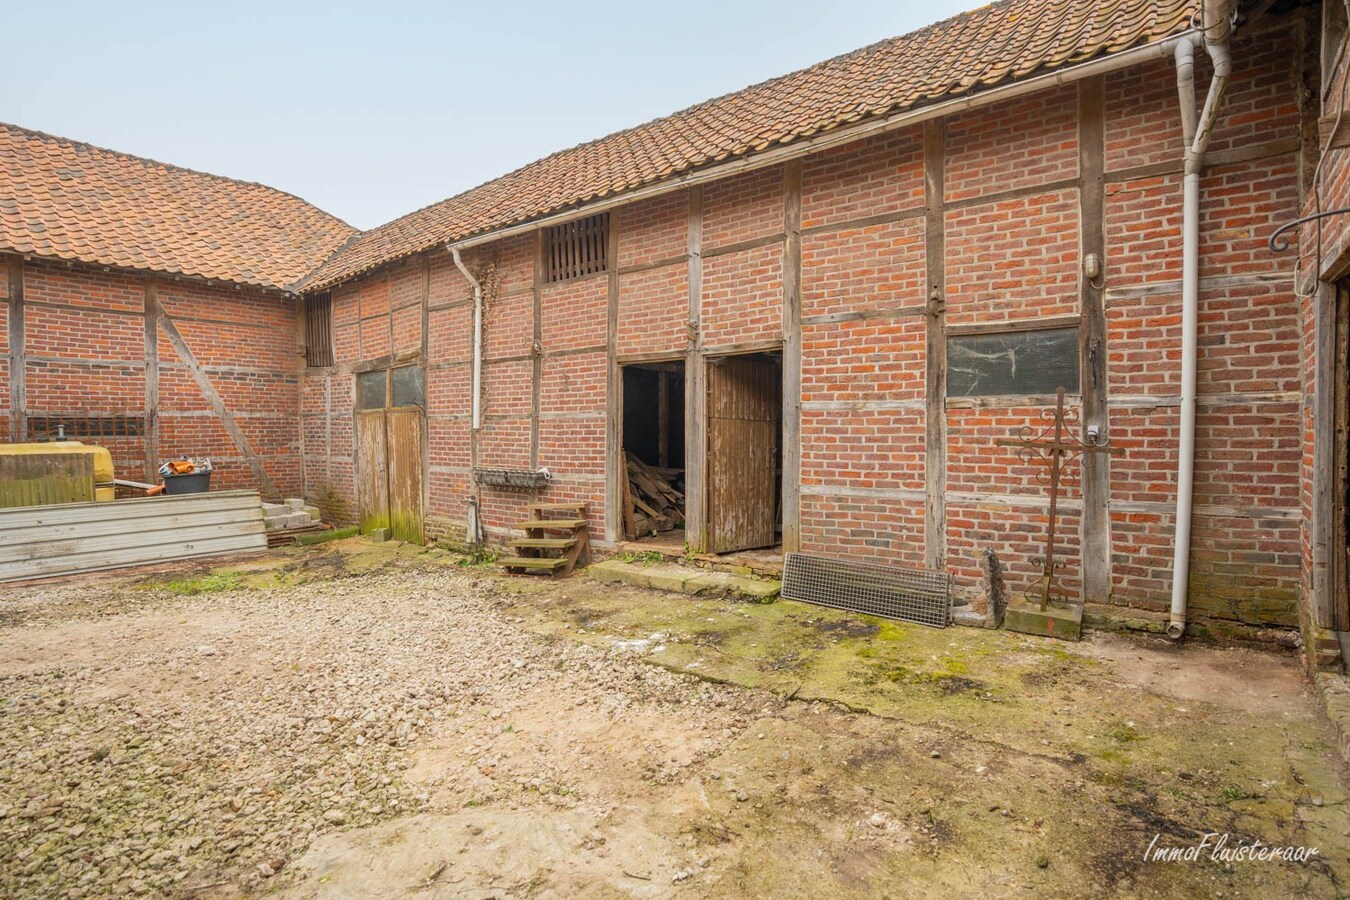 Property sold in Hoeselt